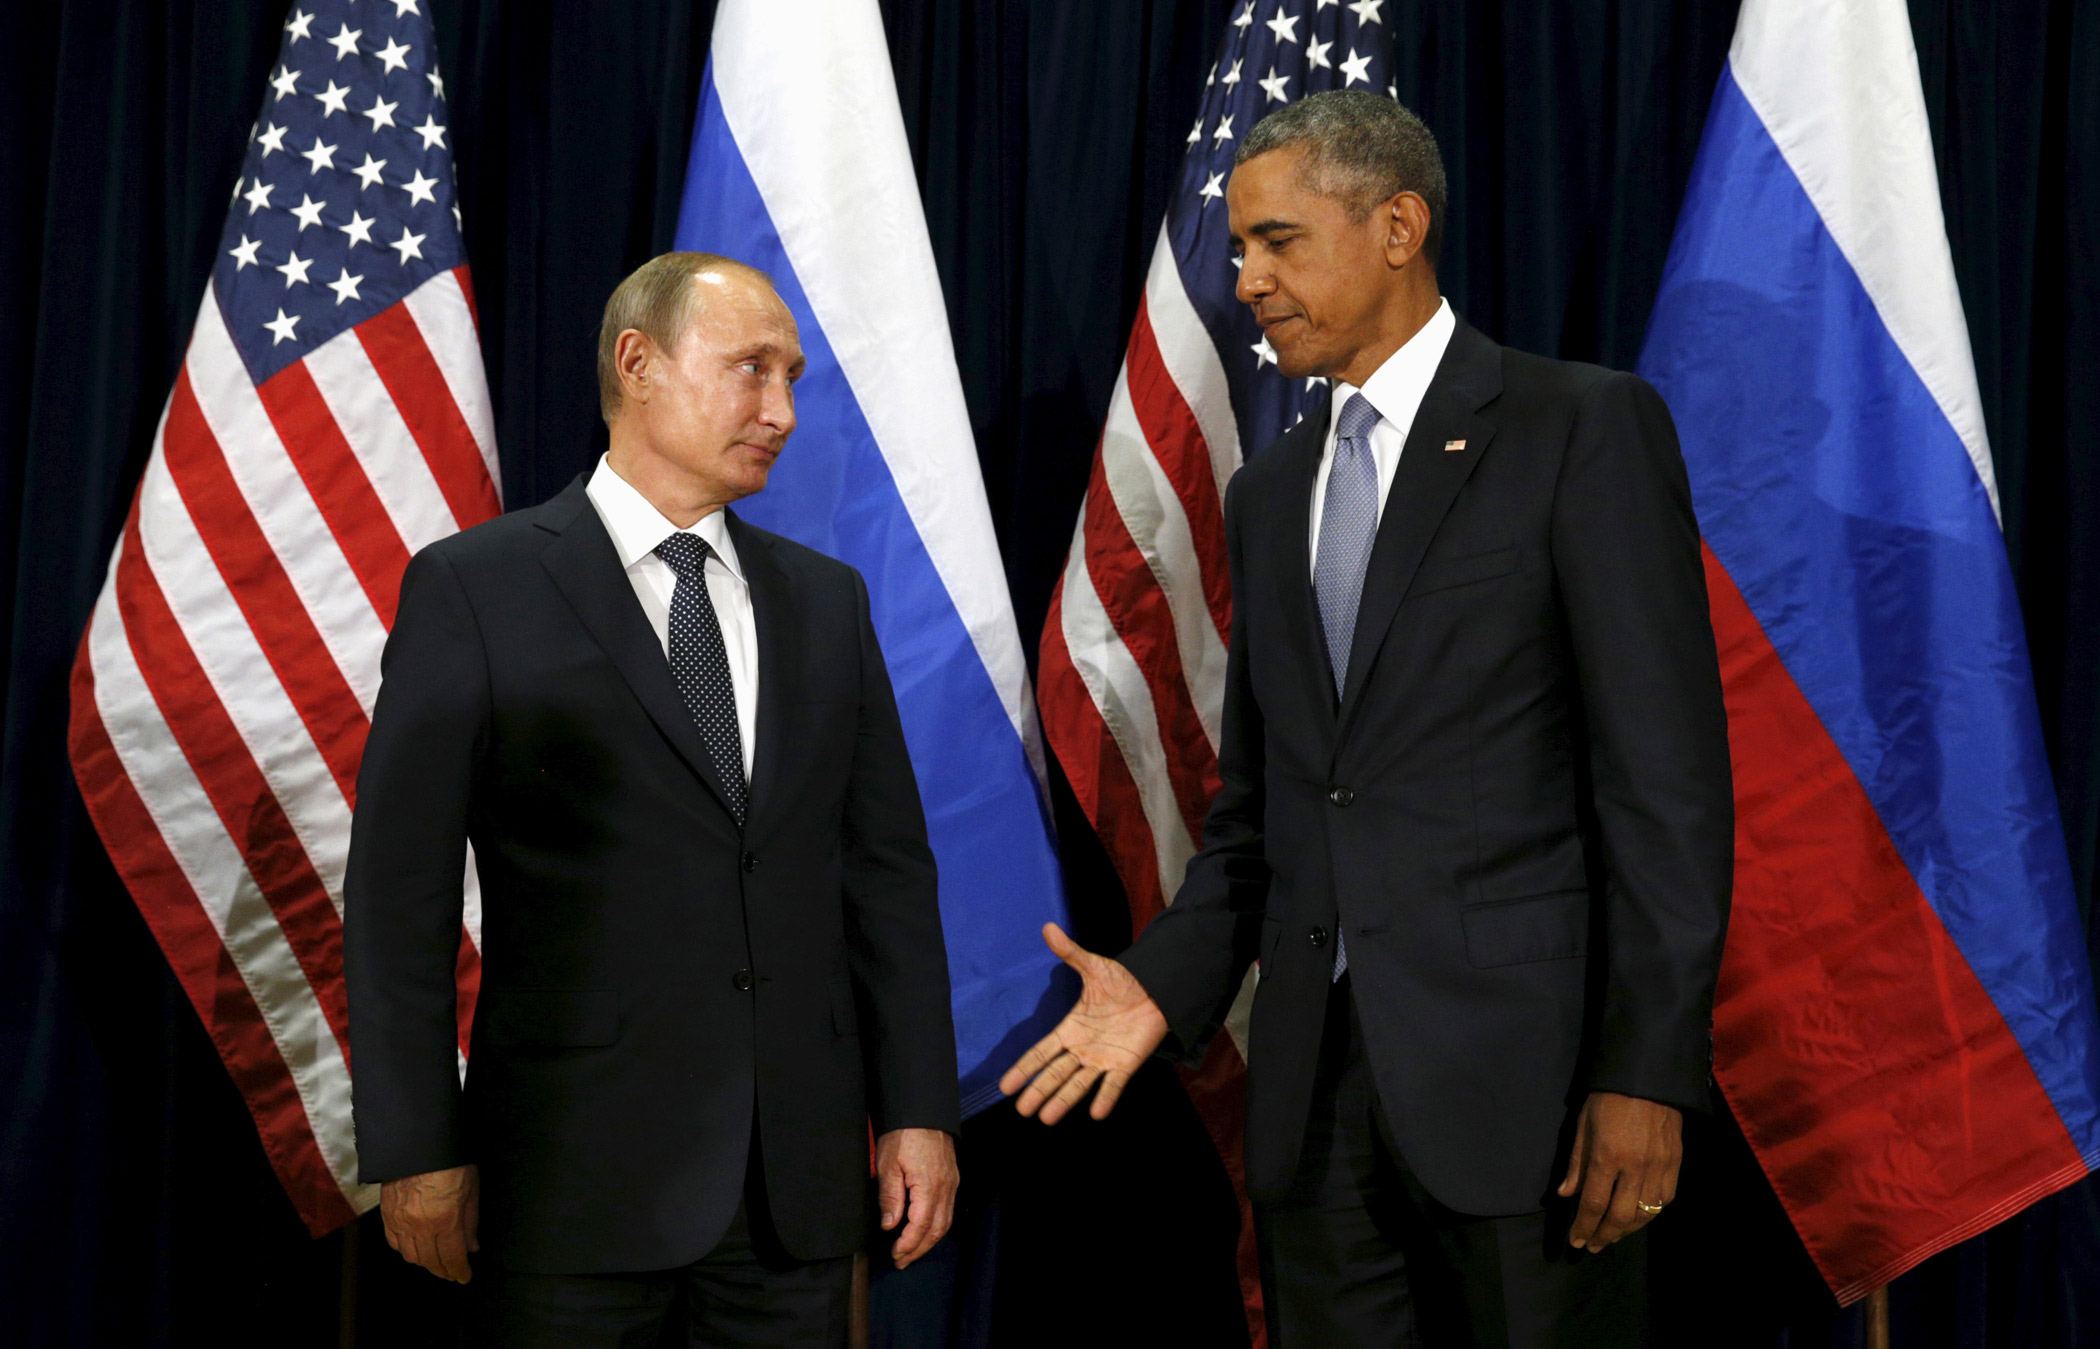 U.S. President Barack Obama extends a hand to Russian President Vladimir Putin during the United Nations General Assembly in New York on Sept. 28, 2015.